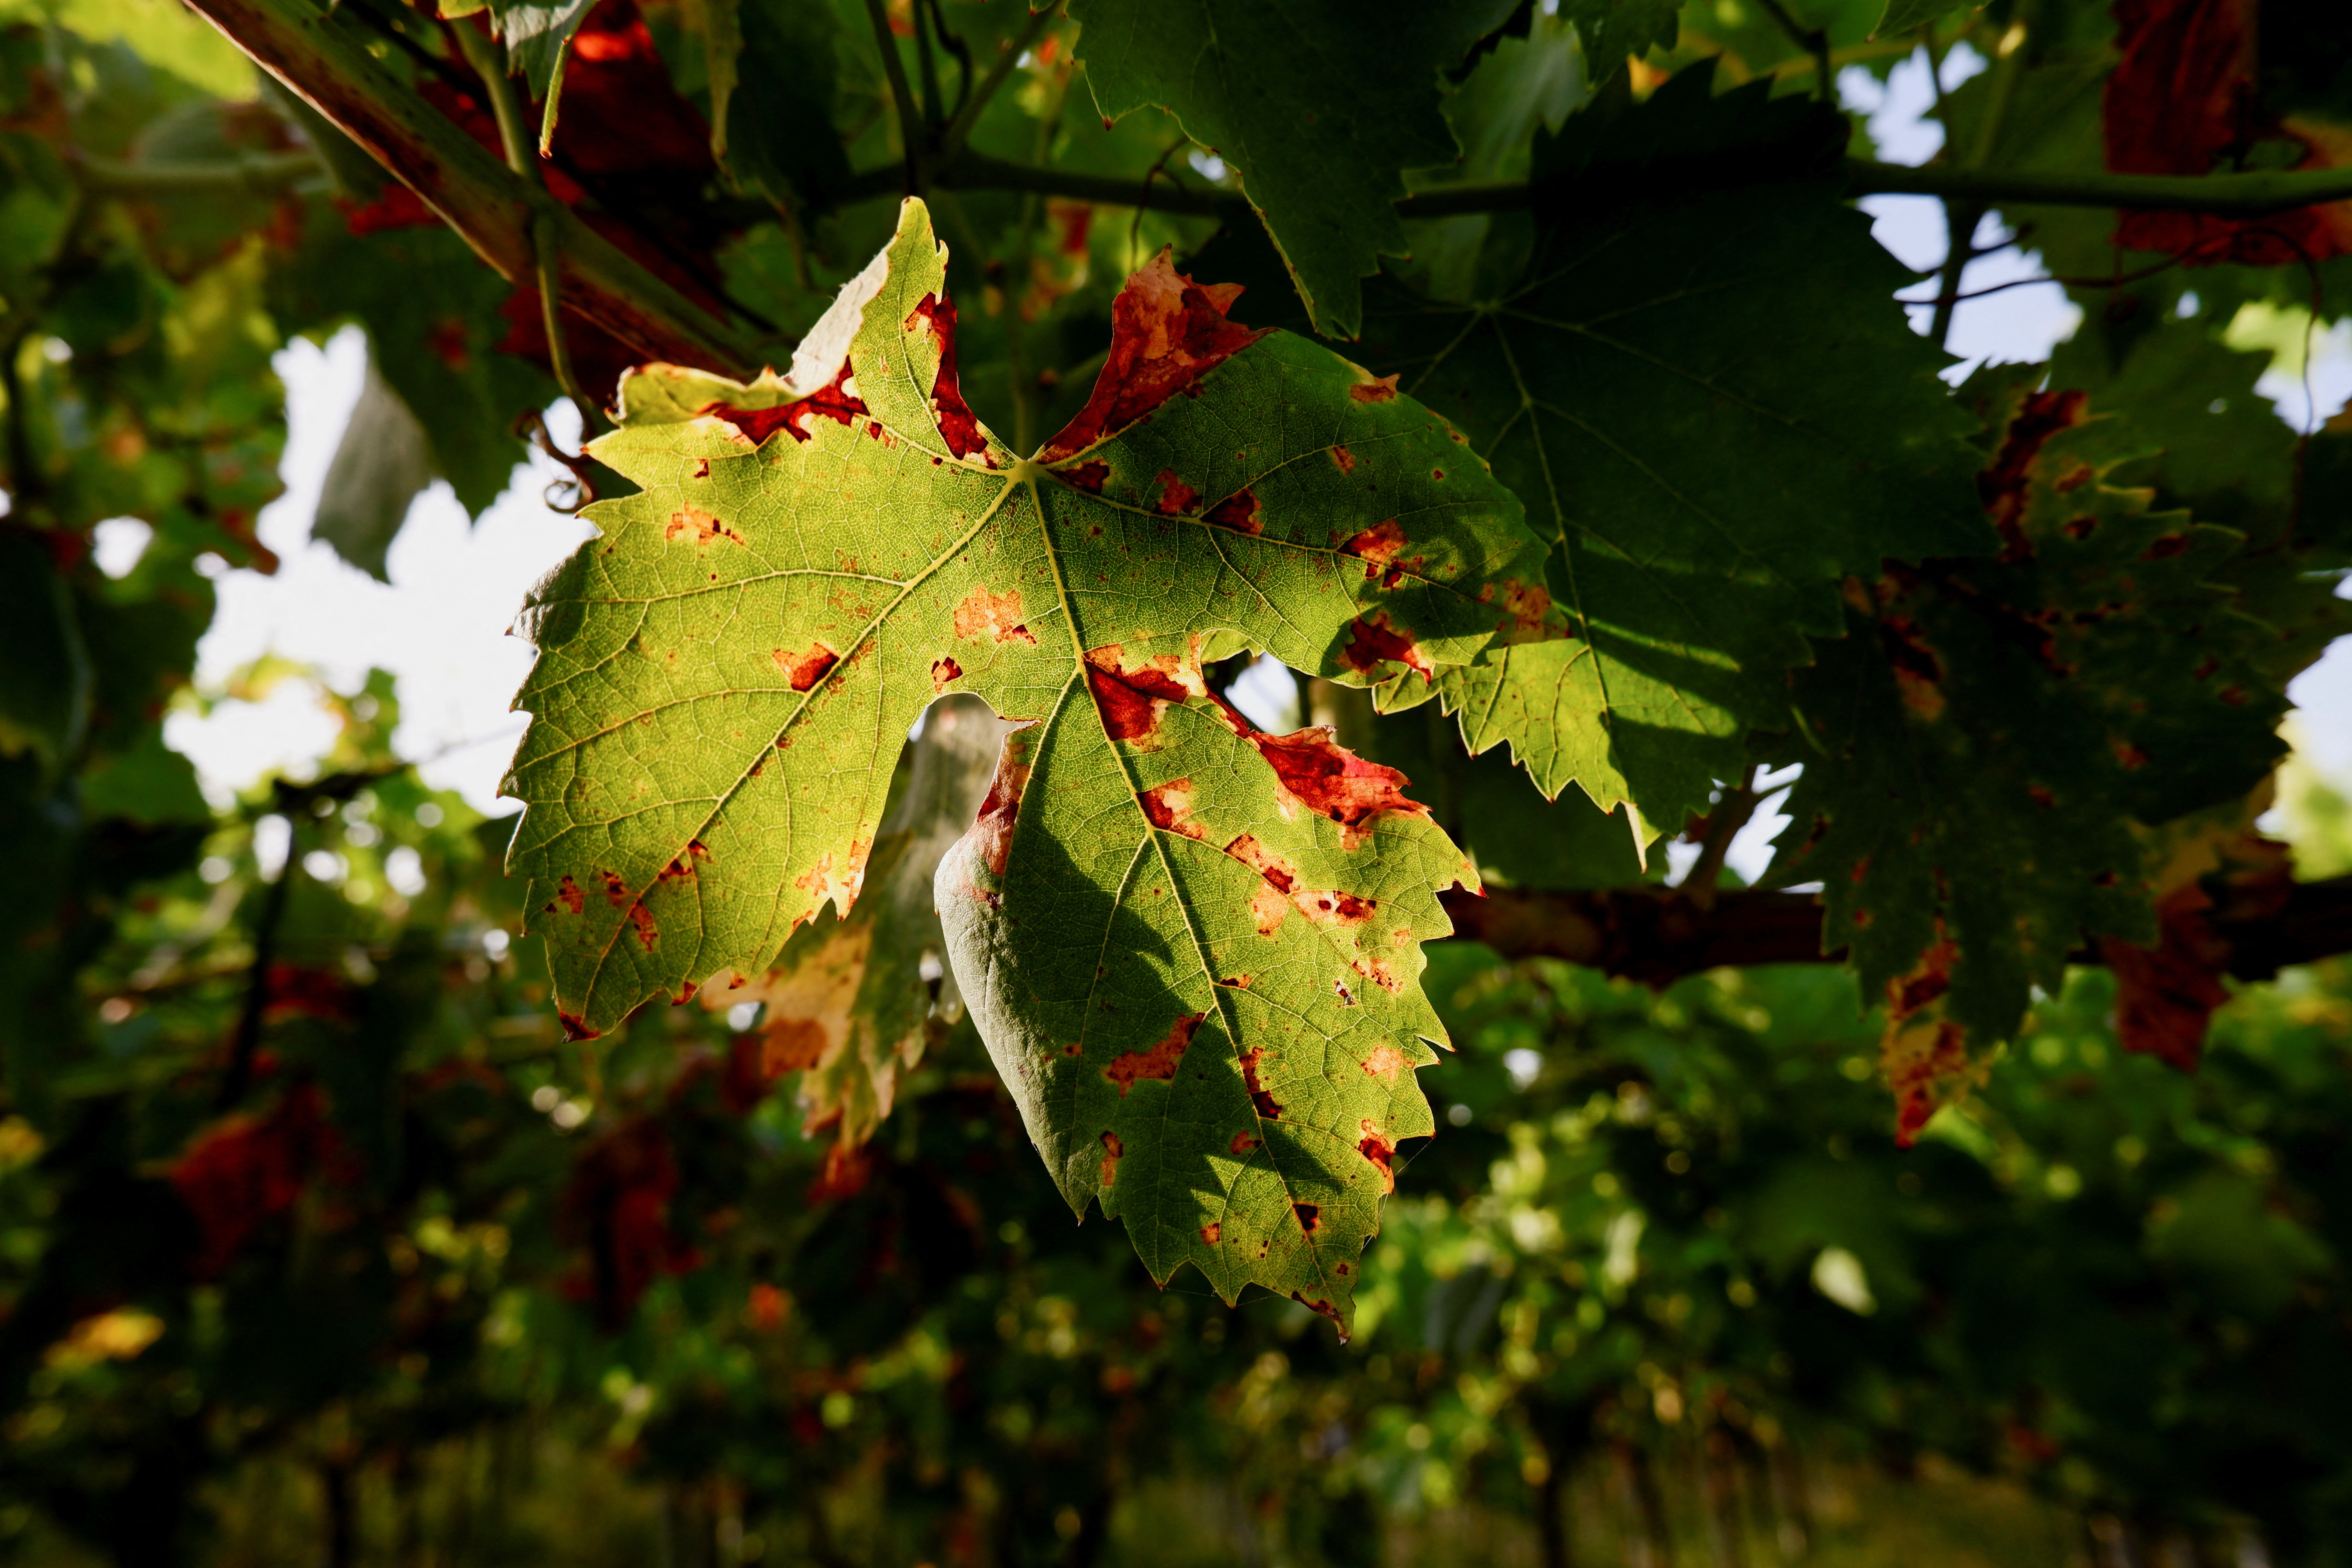 Italy's wine production hit by May downpours and fungus